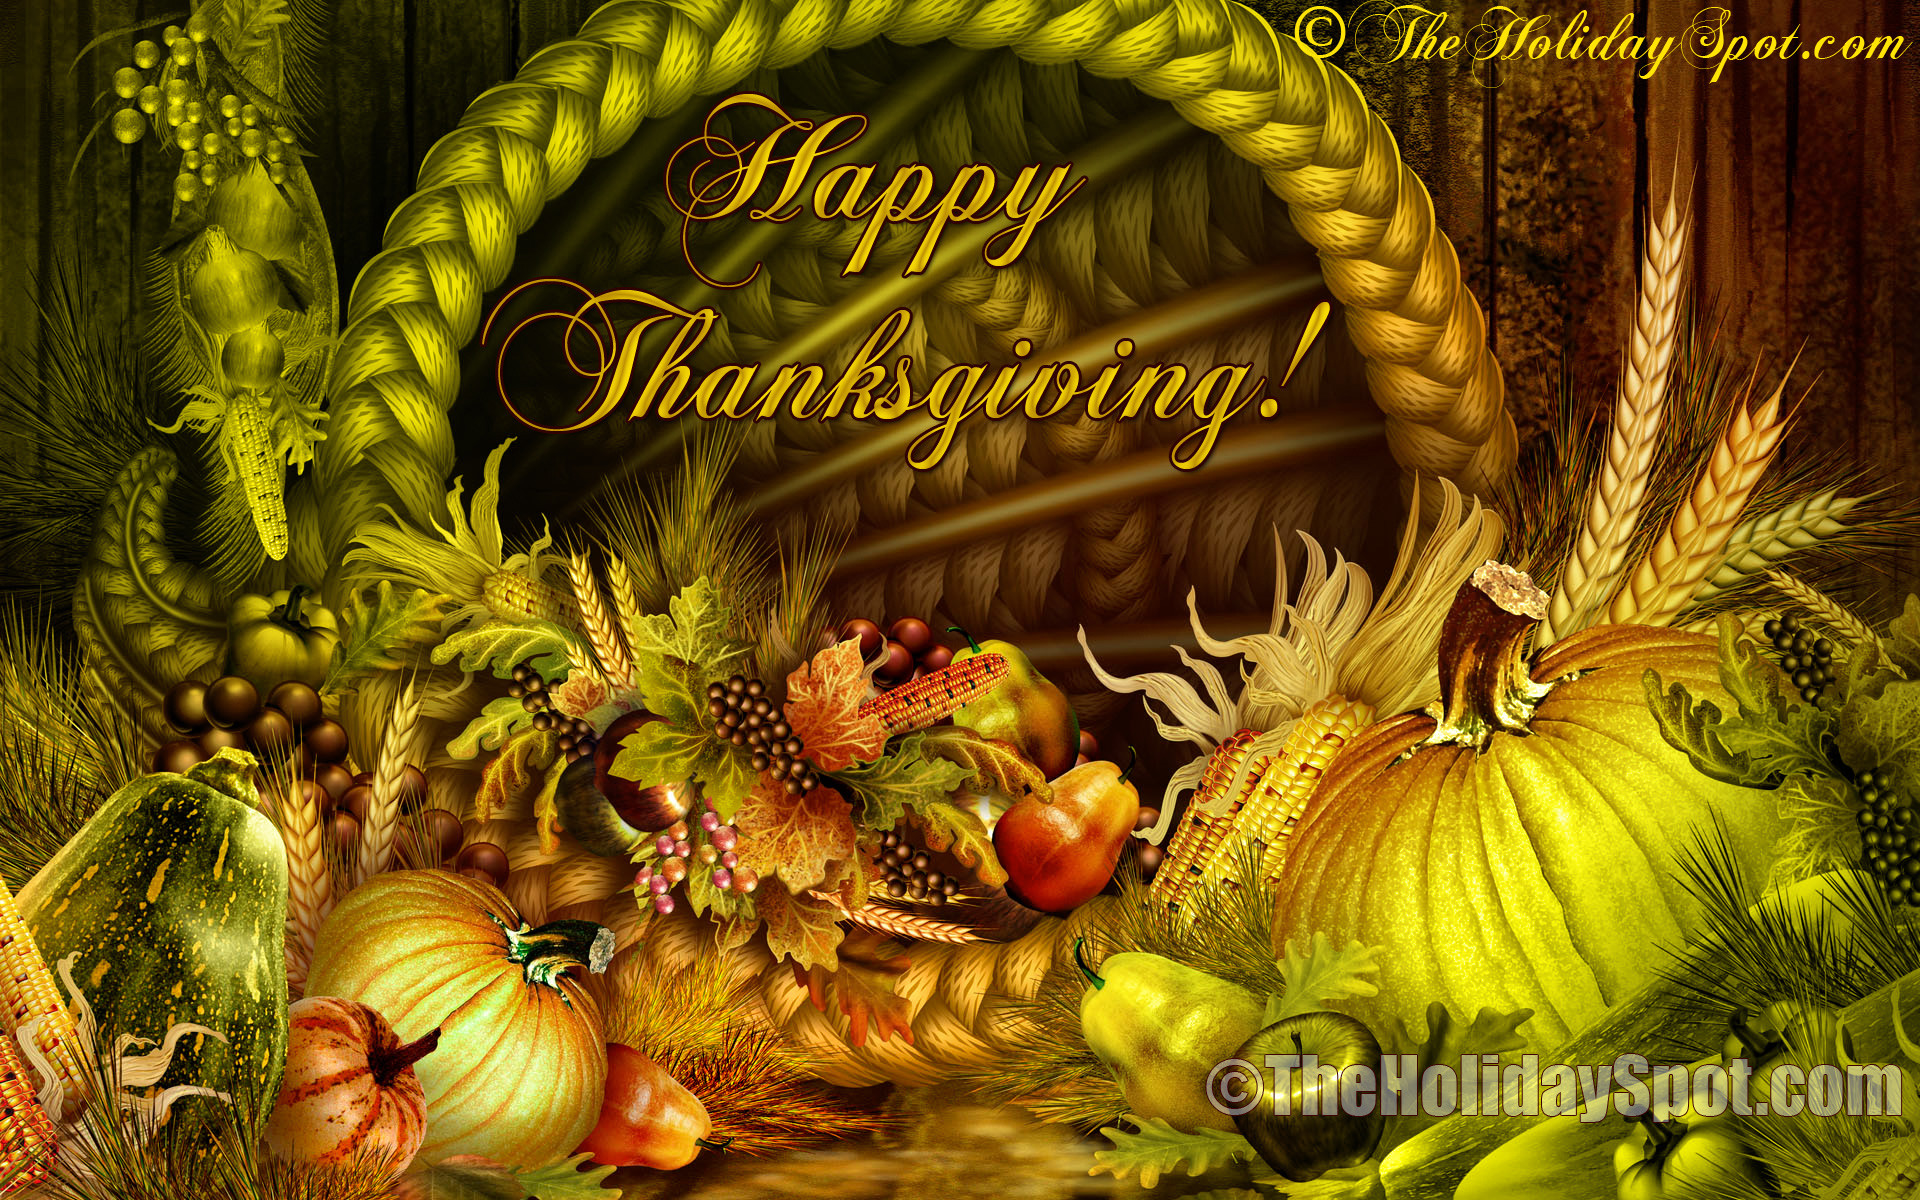 1920x1200 ... x 1200. 25+ Free Thanksgiving Wallpapers ...